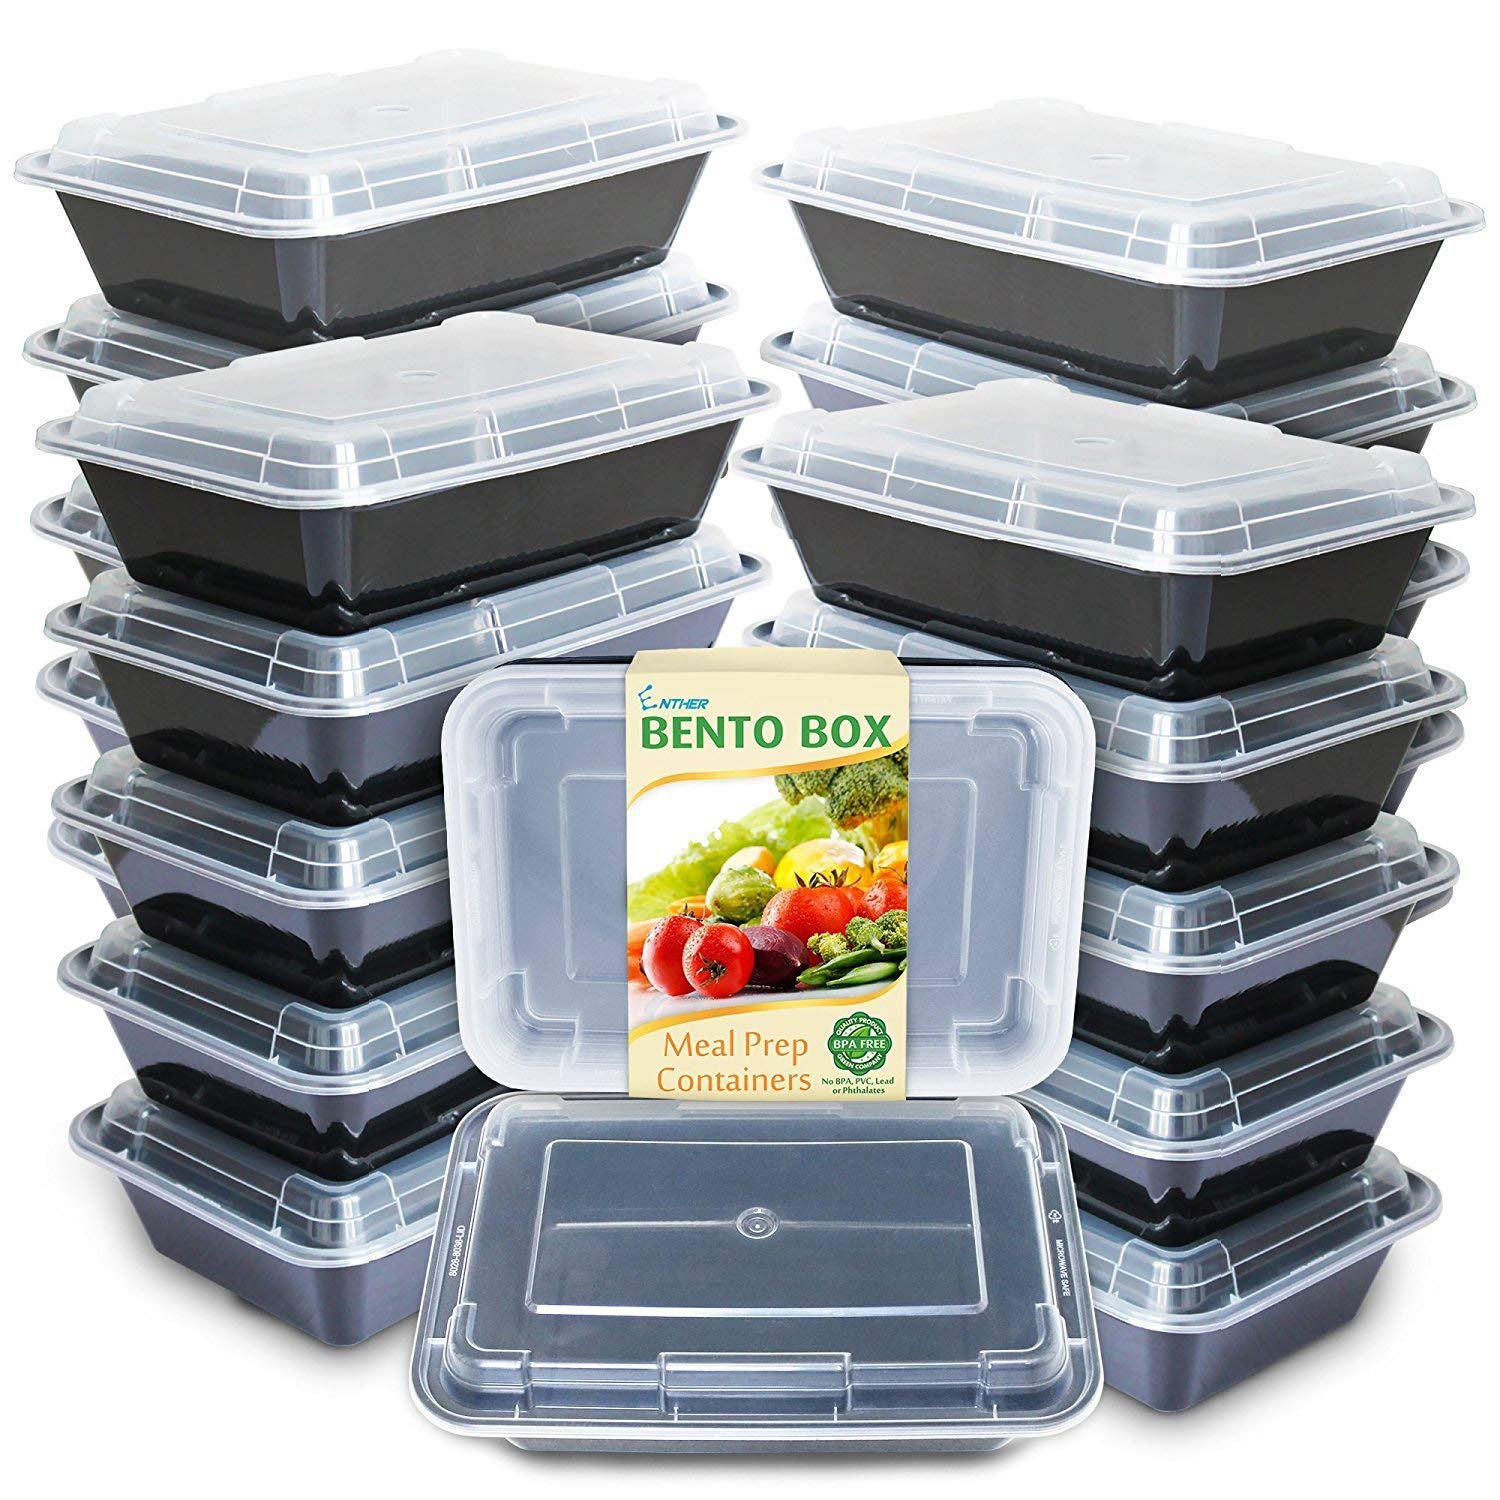 Enther Meal Prep Containers 20 pack 1 Compartment with Lids, Food Storage Bento BPA Free | Stackable | Reusable Lunch Boxes, Microwave/Dishwasher, Freezer Safe,Portion Control (28 oz)